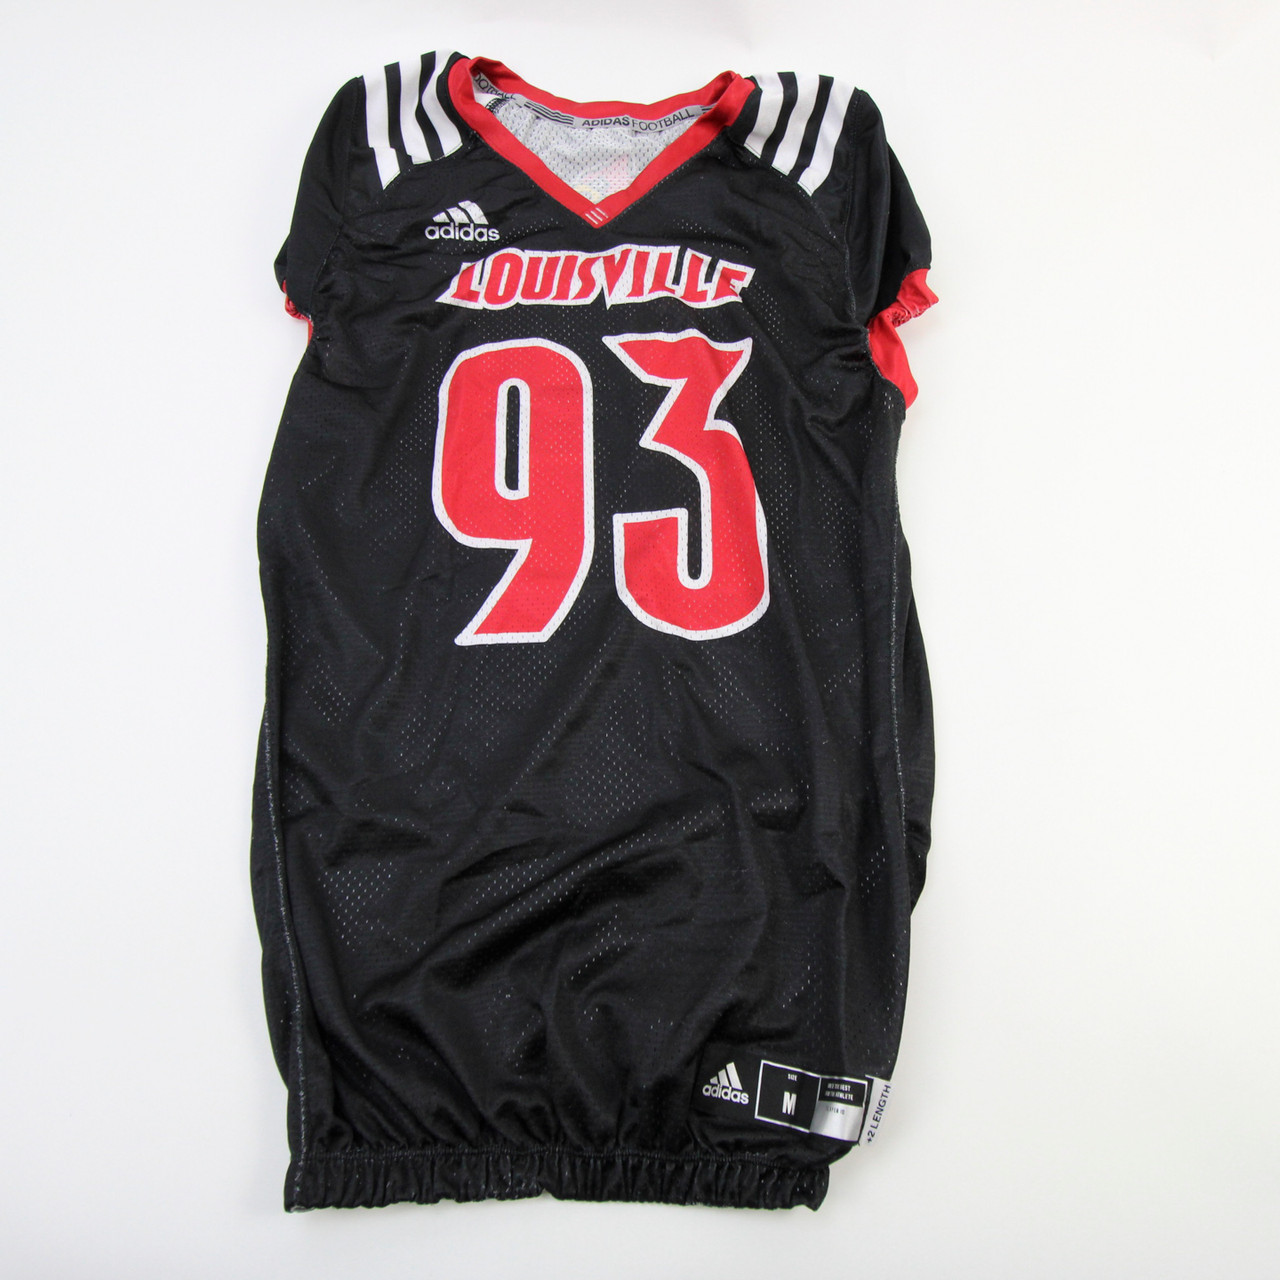 Louisville Cardinals Adidas Practice Jersey - Football Men's Black/Red used M M 50